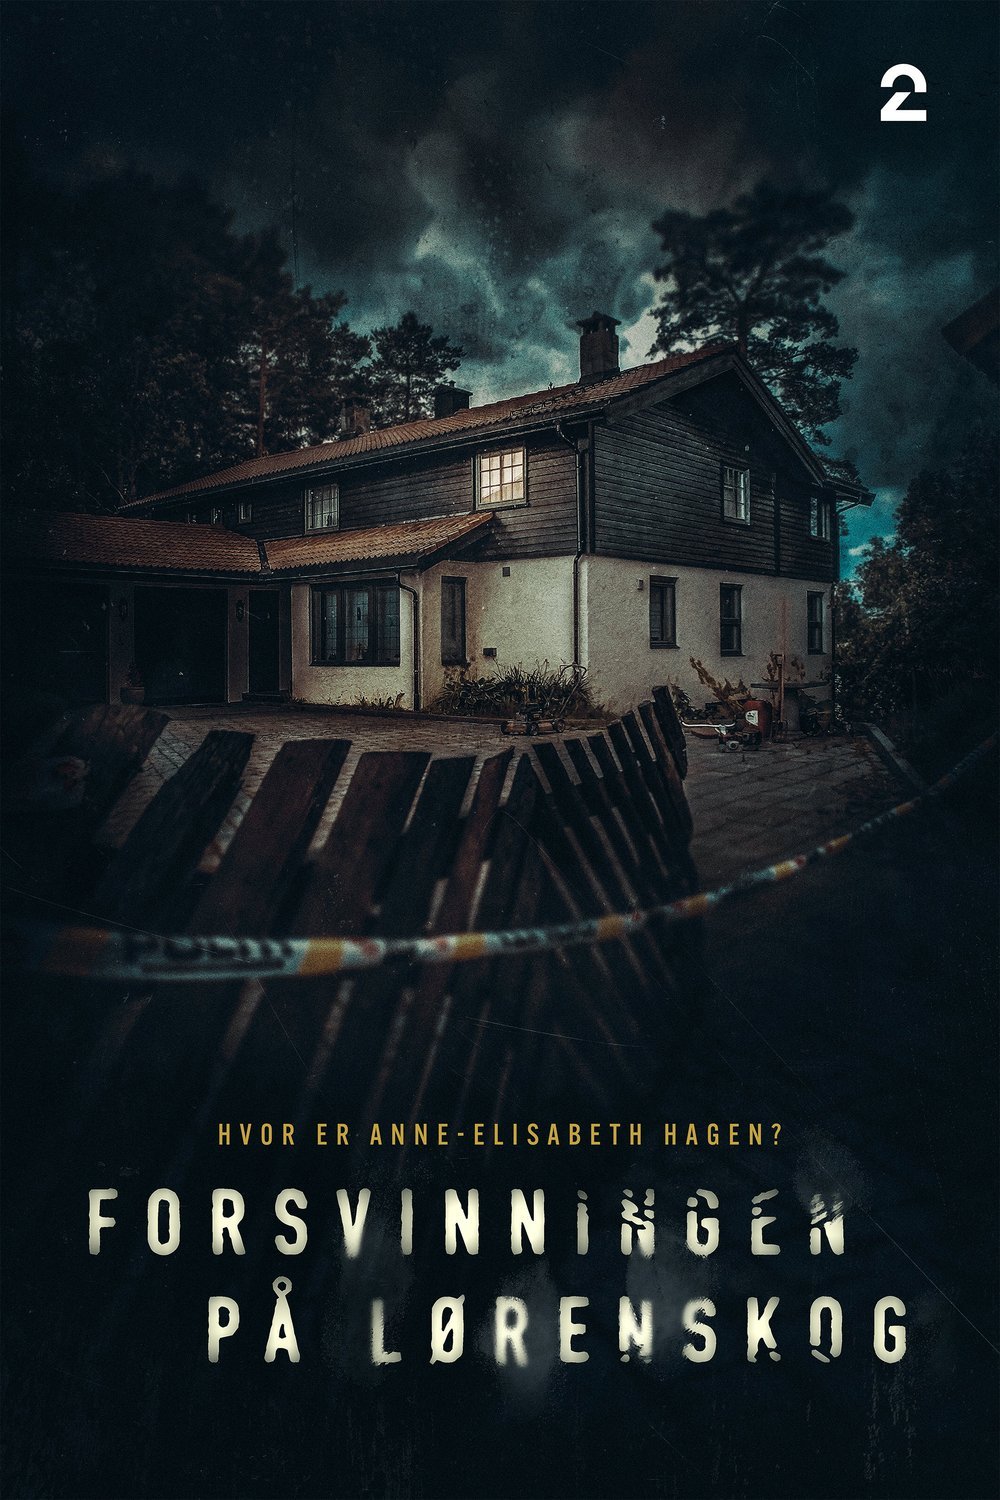 movie review the lorenskog disappearance